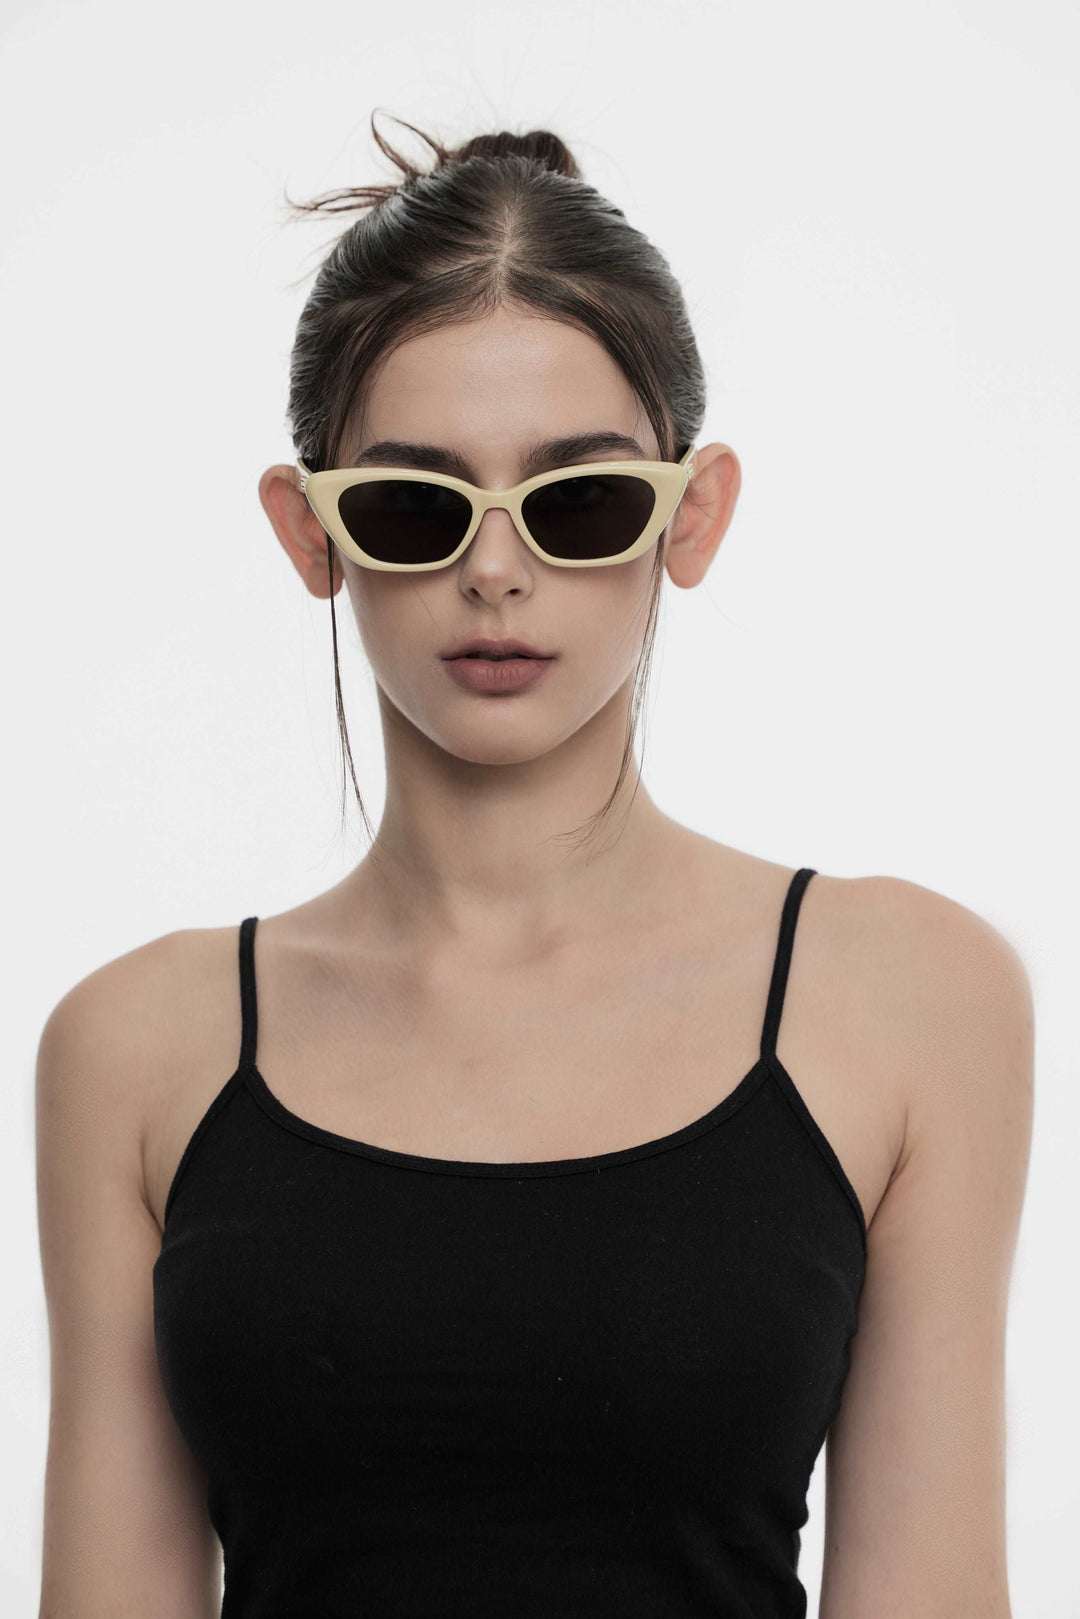 Female Model of her front face wearing California in mayo yellow cat-eye stylish sunglasses from Mercury Retrograde Burr Puzzle Collection 